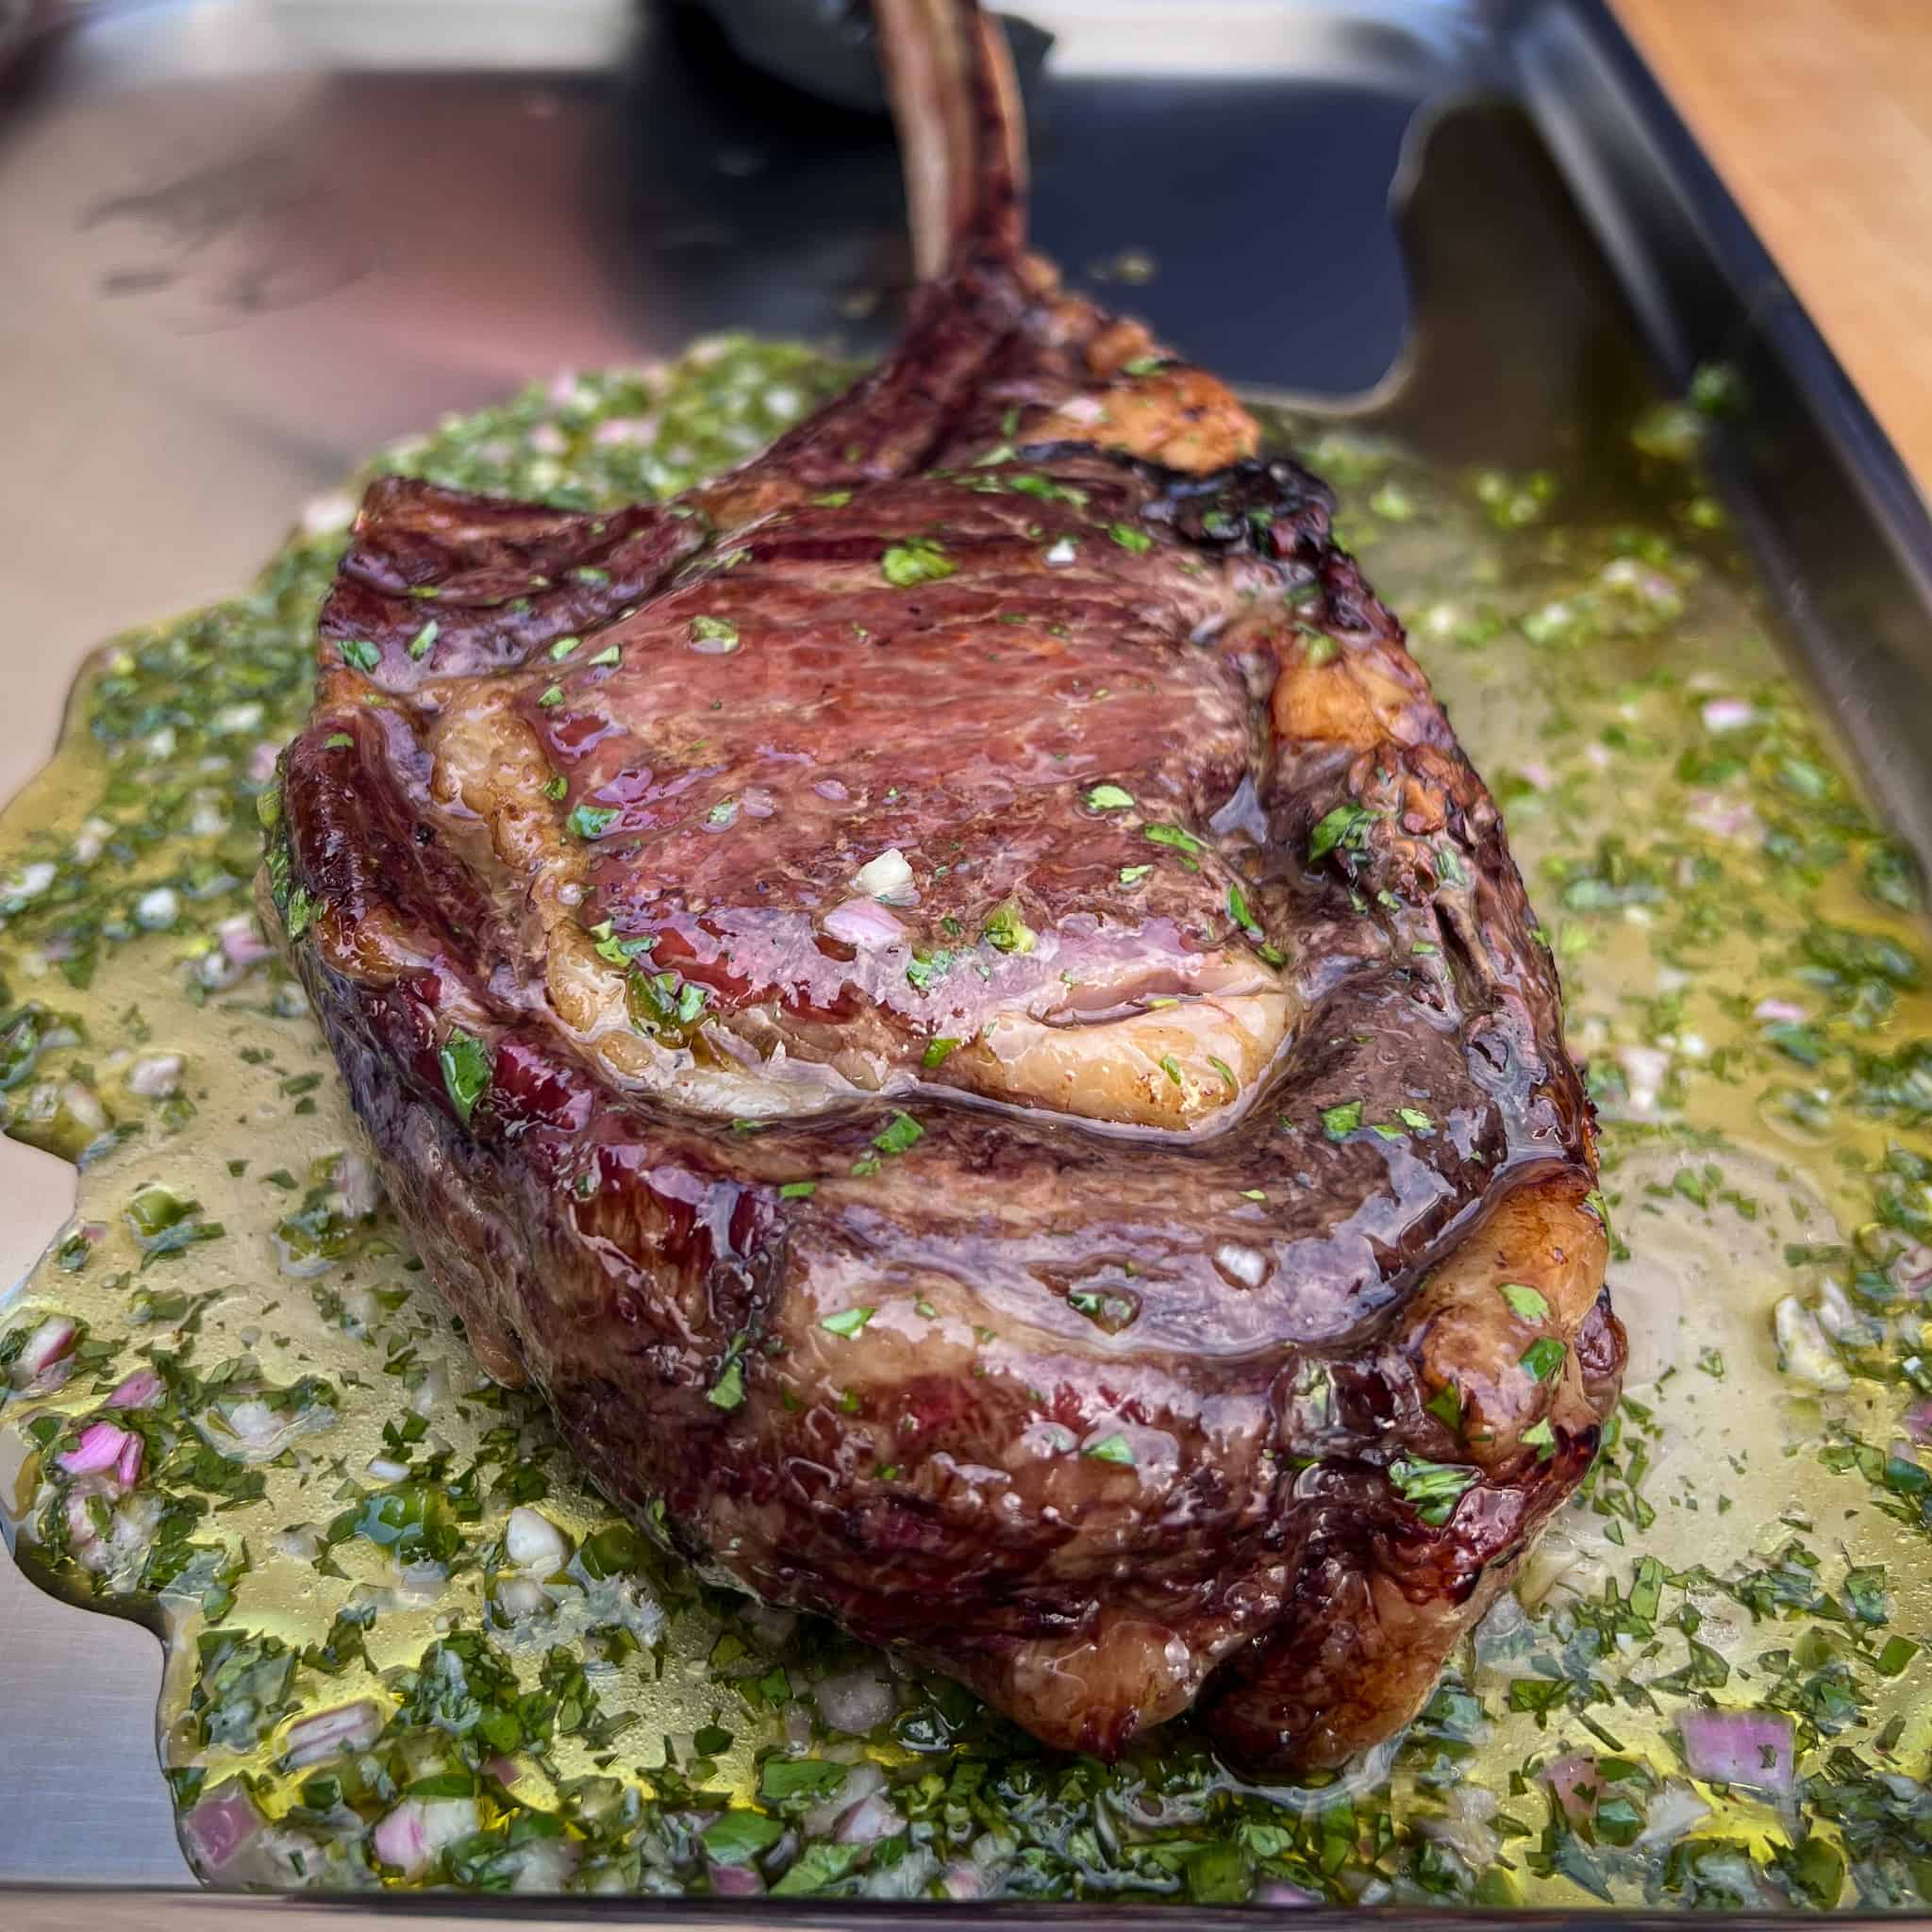 A grilled bison frenched ribeye steak on a tray with a fresh herb sauce.